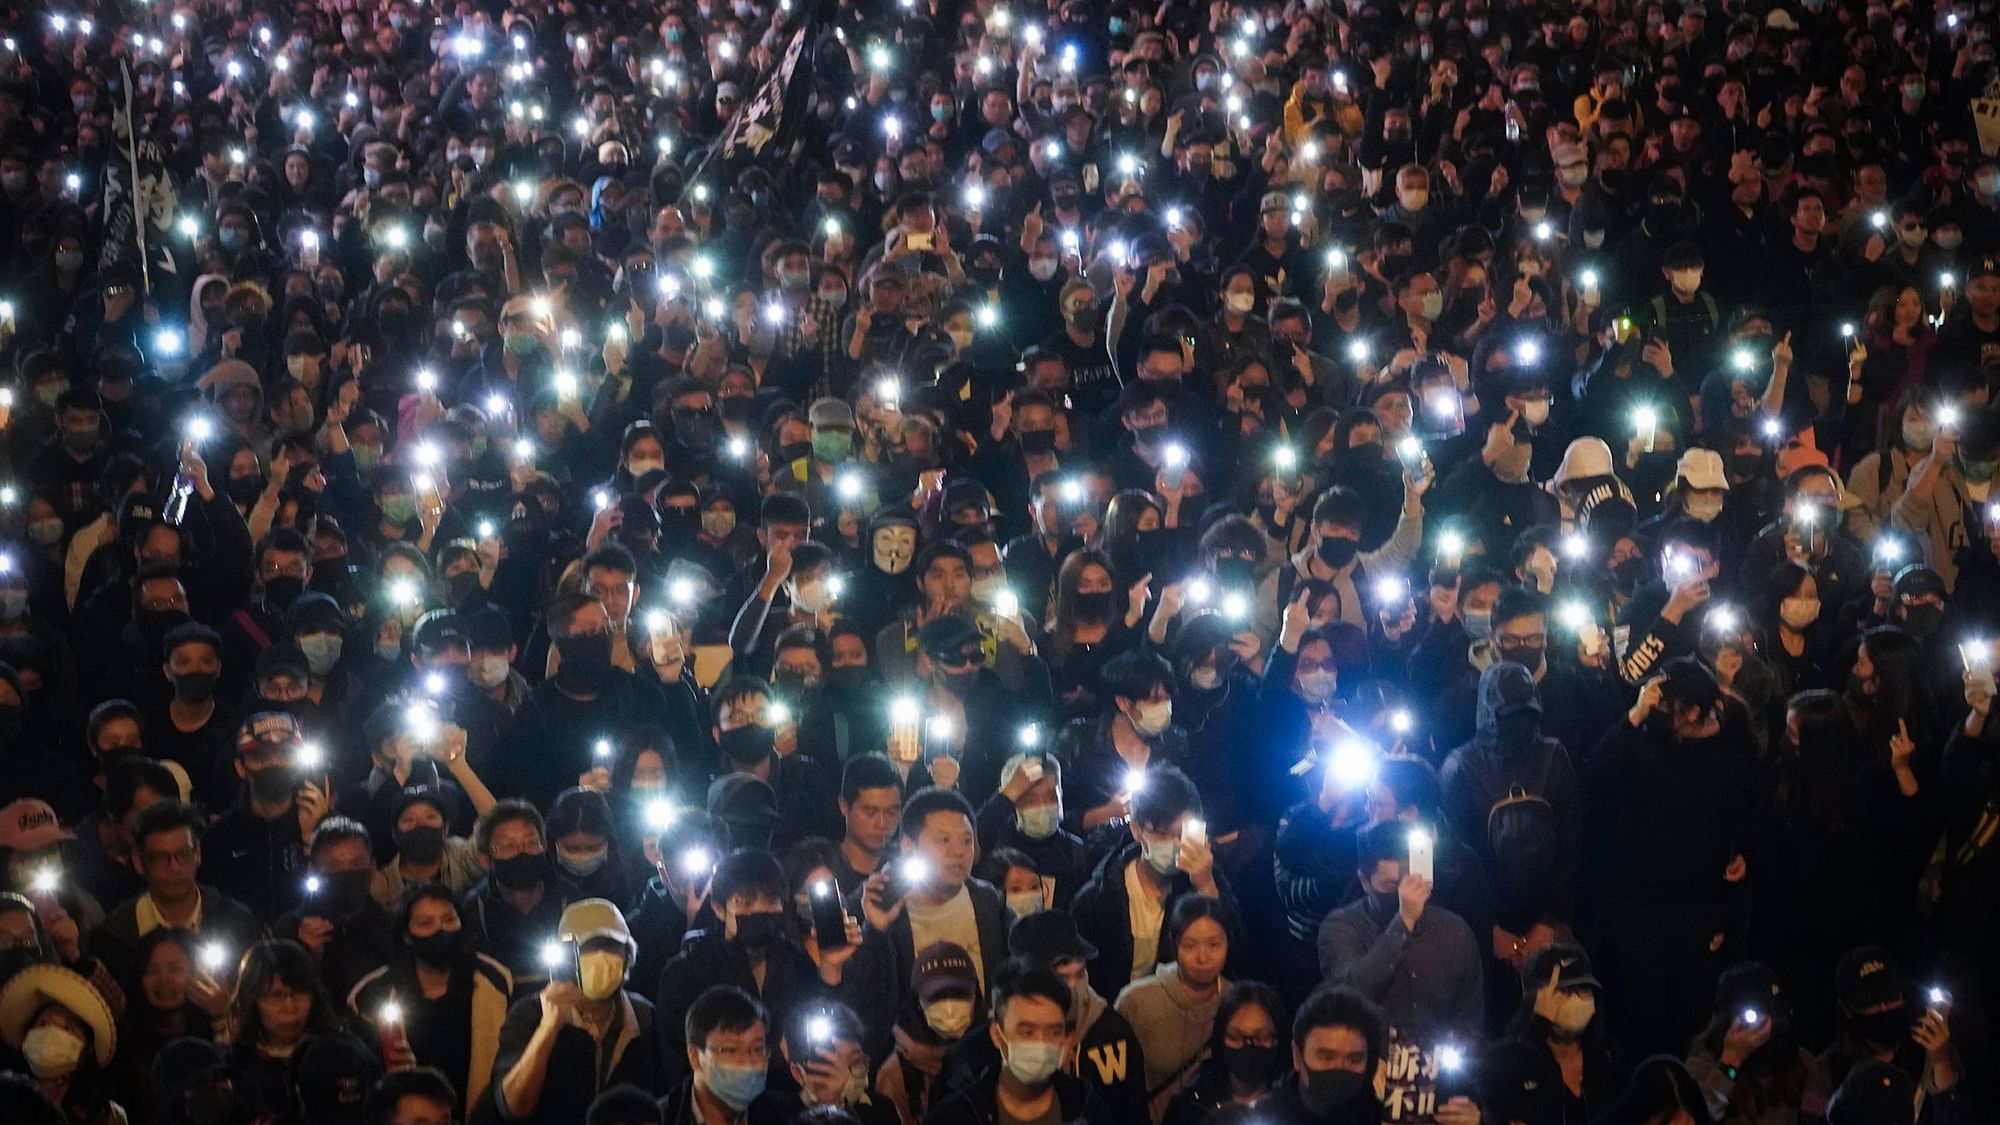 Pro-democracy protesters flash their smartphones lights as they gather on a street in Hong Kong on Sunday.